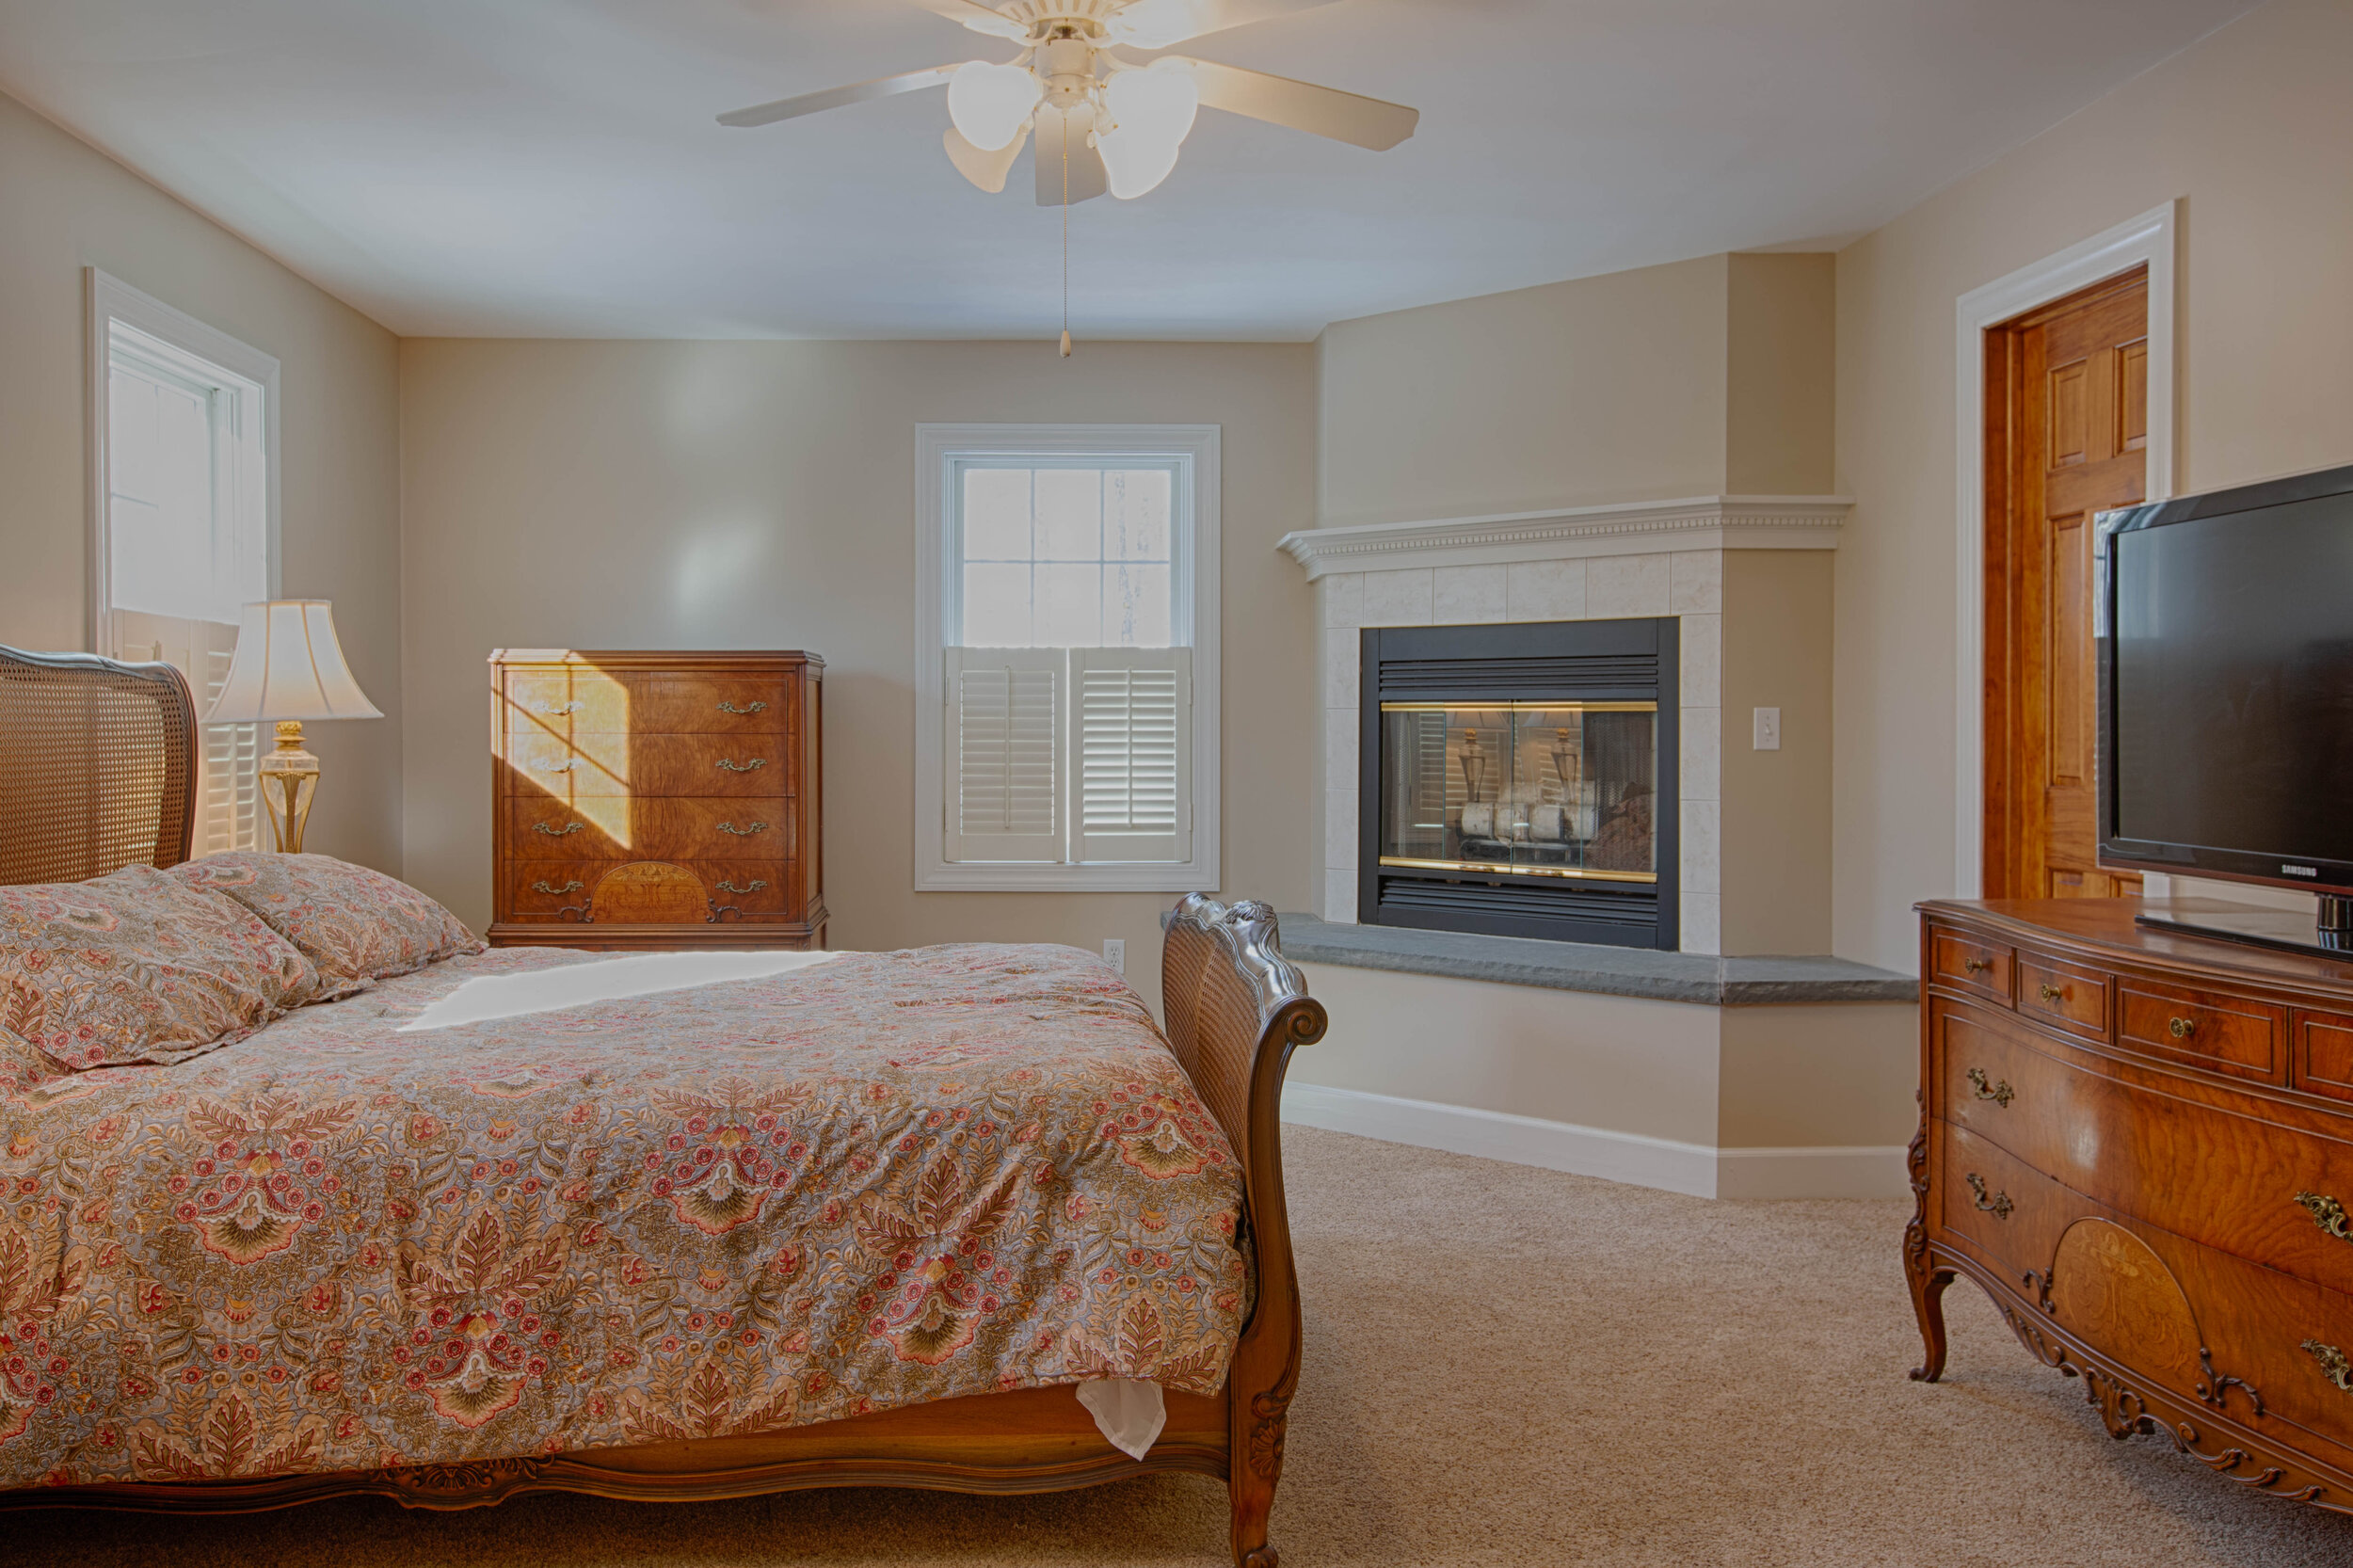  Master bedroom with sleigh bed in center.  There is a gas fireplace in the room too. 